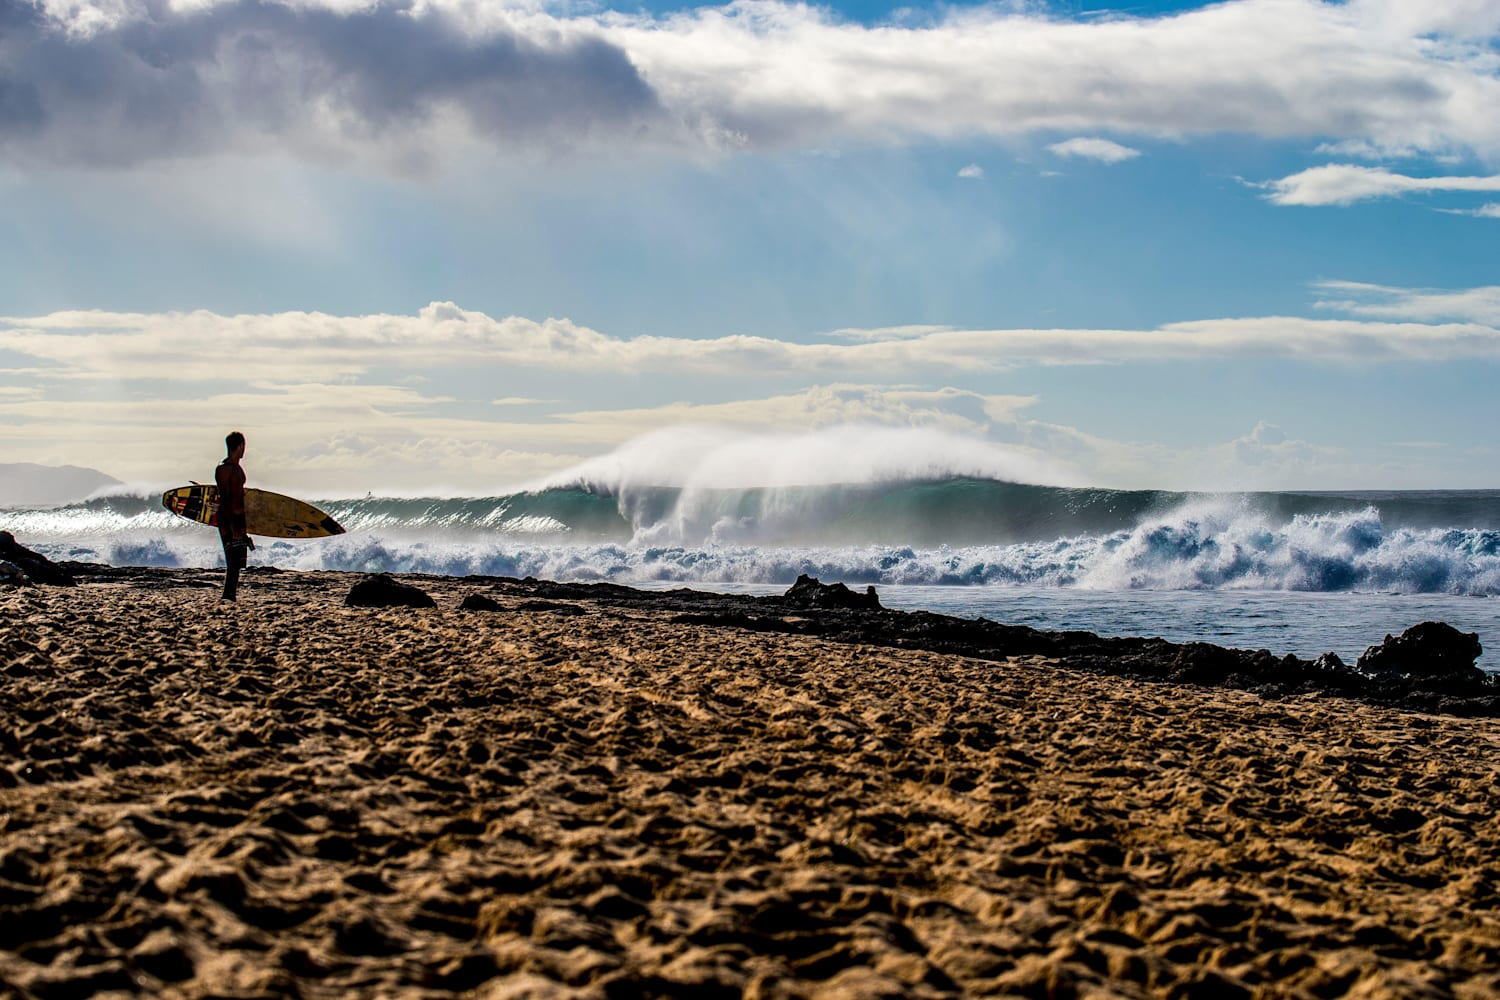 A Photo We Love Pipeline Prepares For Battle